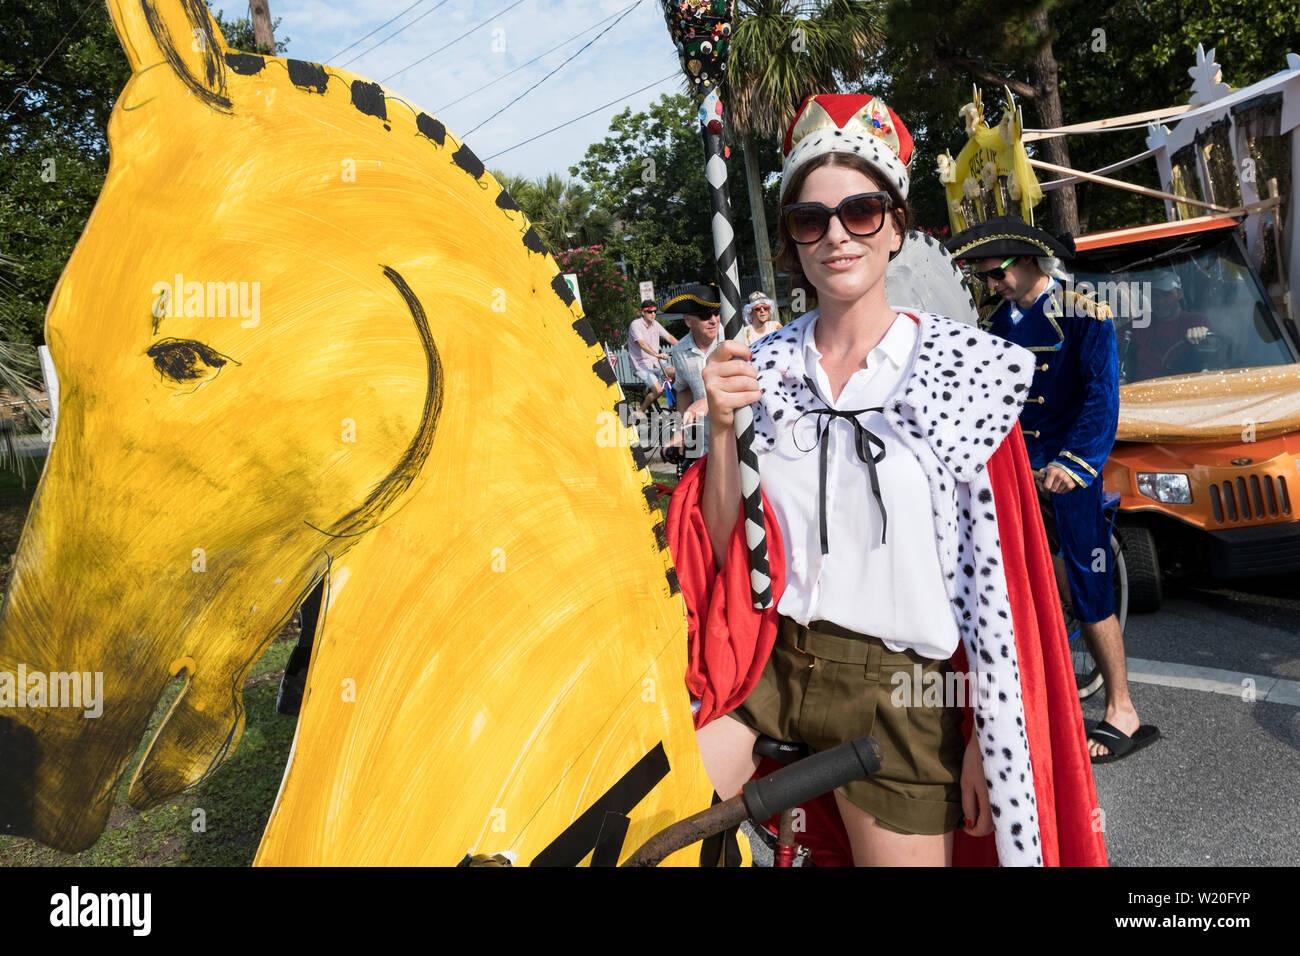 A woman dressed in costume rides a bicycle decorated as horses during the annual Independence Day golf cart and bicycle parade July 4, 2019 in Sullivan's Island, South Carolina. The tiny affluent Sea Island beach community across from Charleston holds an outsized golf cart parade featuring more than 75 decorated carts. Stock Photo